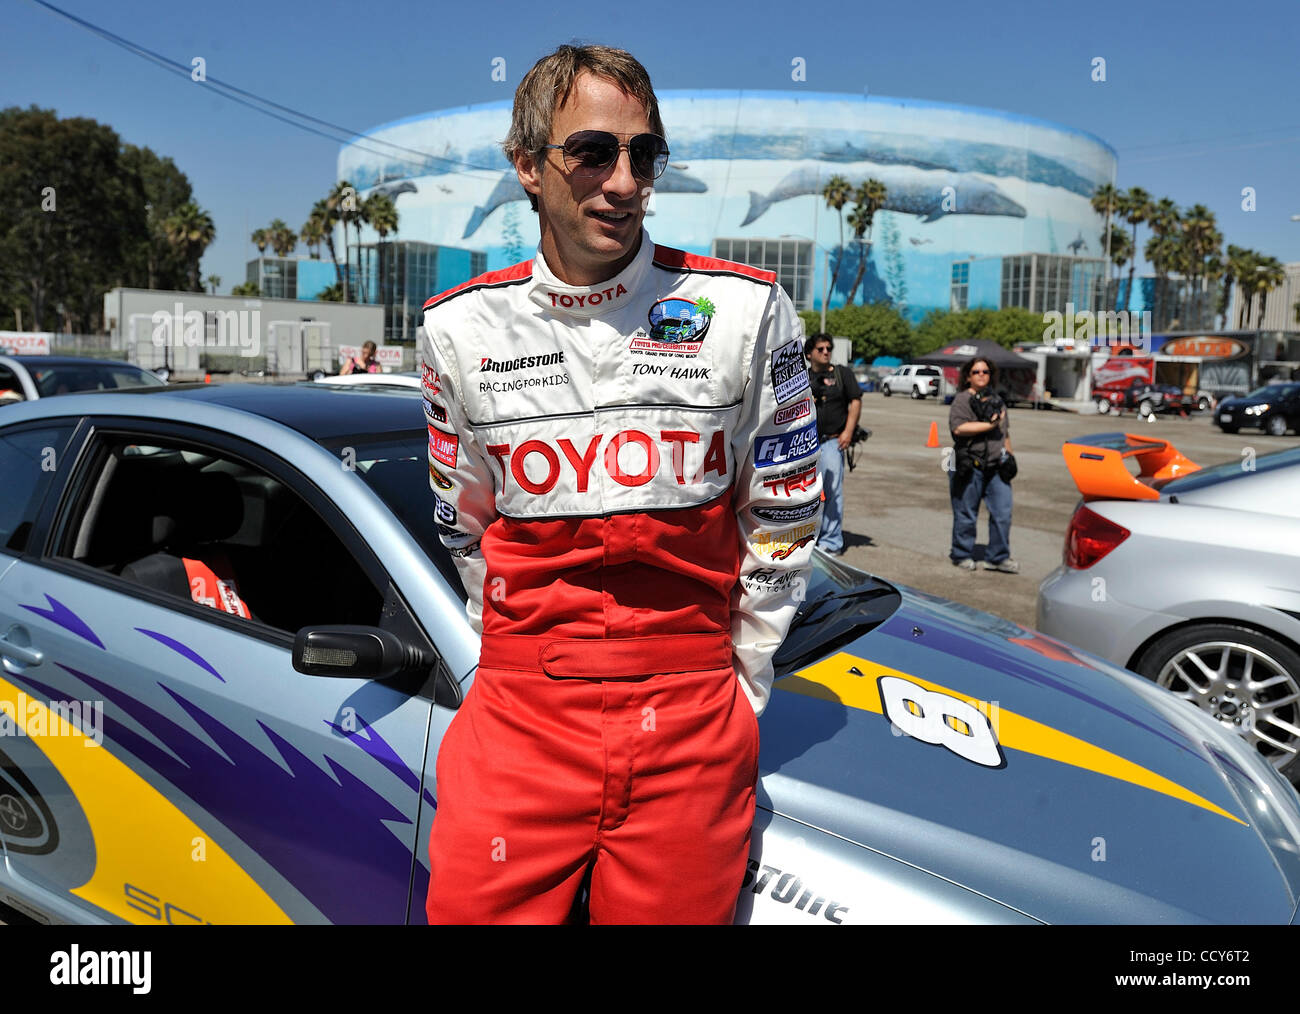 LONG BEACH, CALIF. -- Tony Hawk during the media day for the Toyota Grand Prix of Long Beach (Calif.) on April 6, 2010. Hawk is racing in the Toyota Pro/Celebrity race on Saturday, April 17.  Photo by Jeff Gritchen / Long Beach Press-Telegram Stock Photo